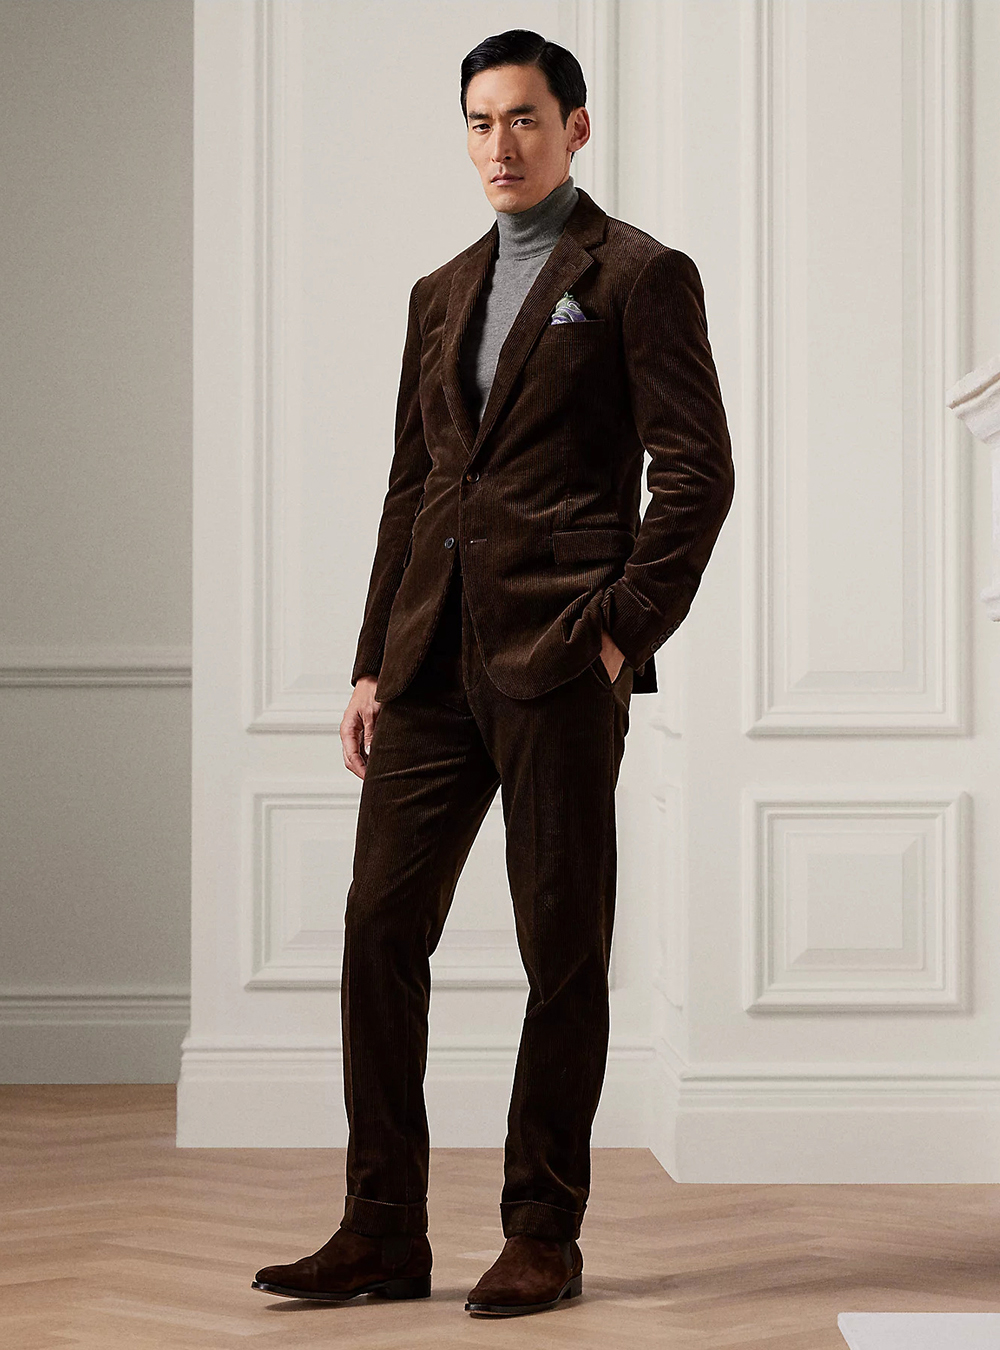 Brown Suit Color Combinations with Shirt and Tie - Suits Expert